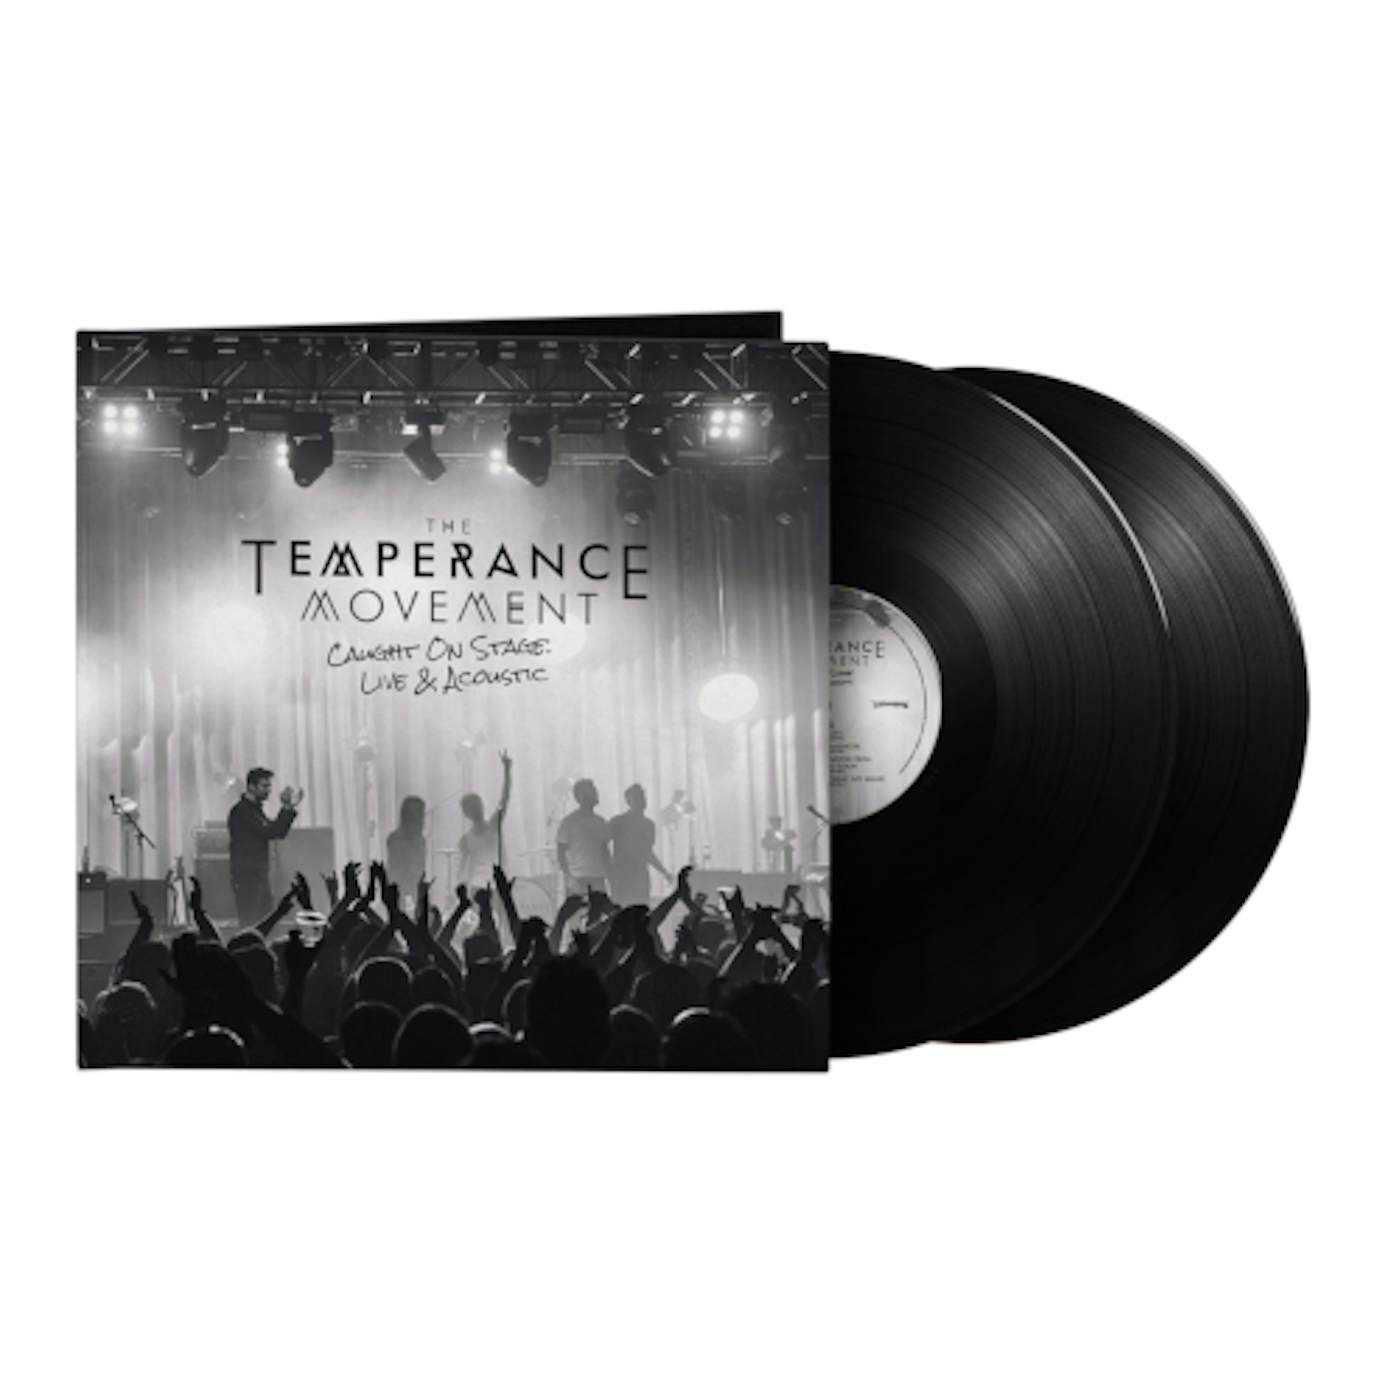 The Temperance Movement Caught On Stage: Live & Acoustic Vinyl Record